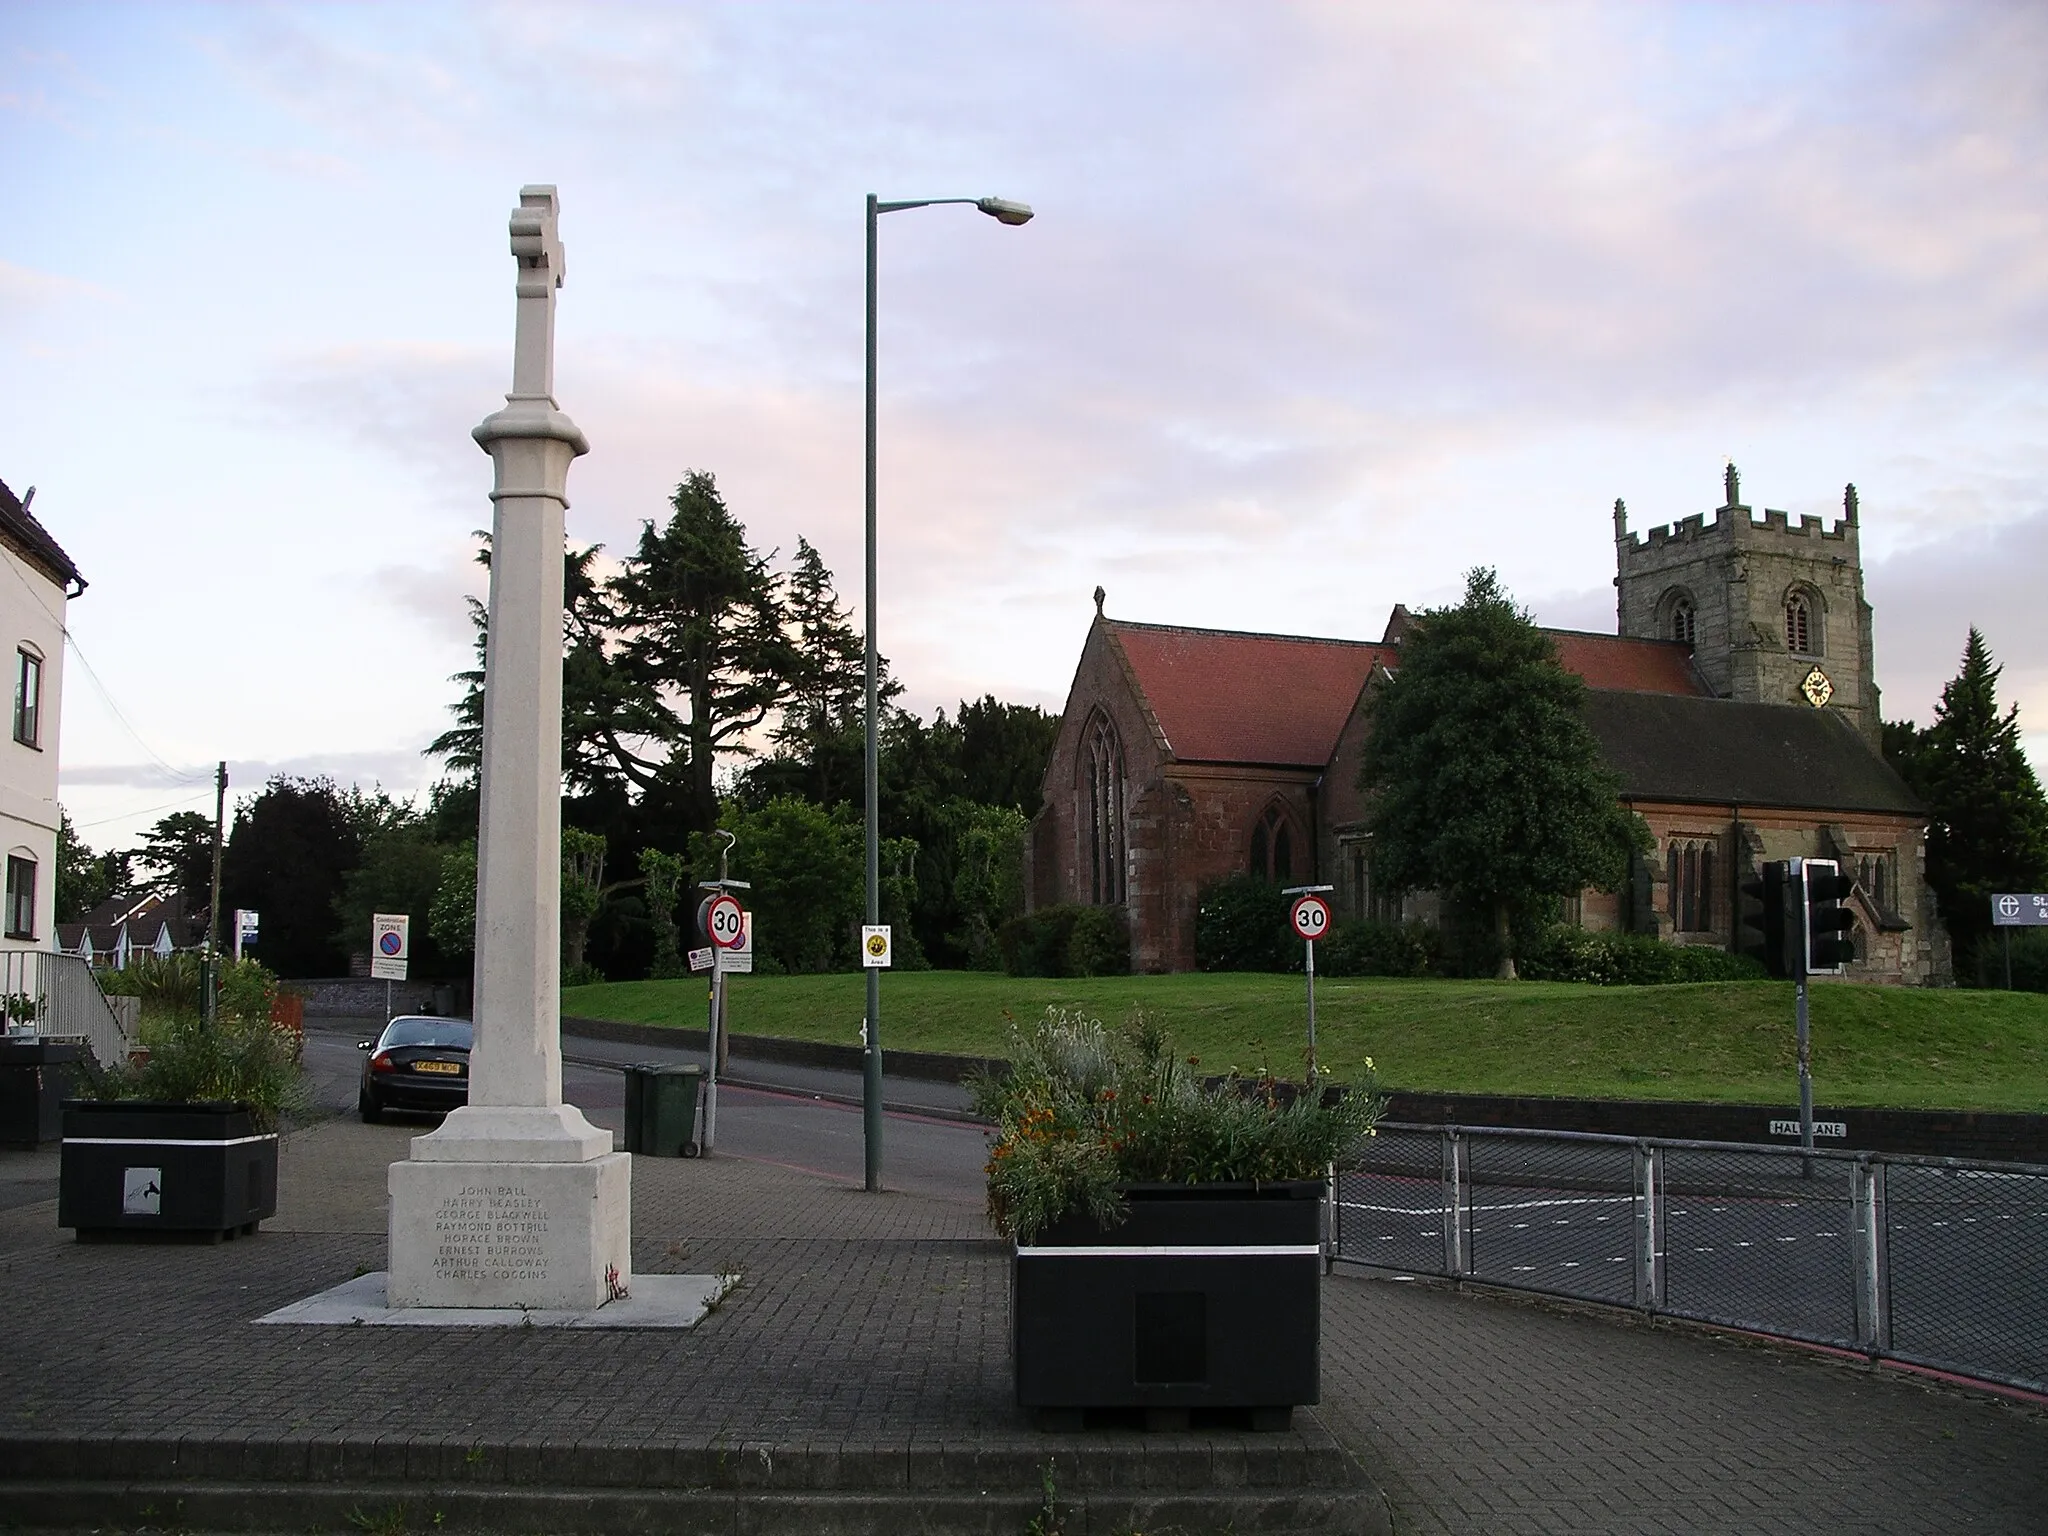 Photo showing: War memorial (1914-1918) in Walsgrave, Coventry, England. St Marys church is in the background.